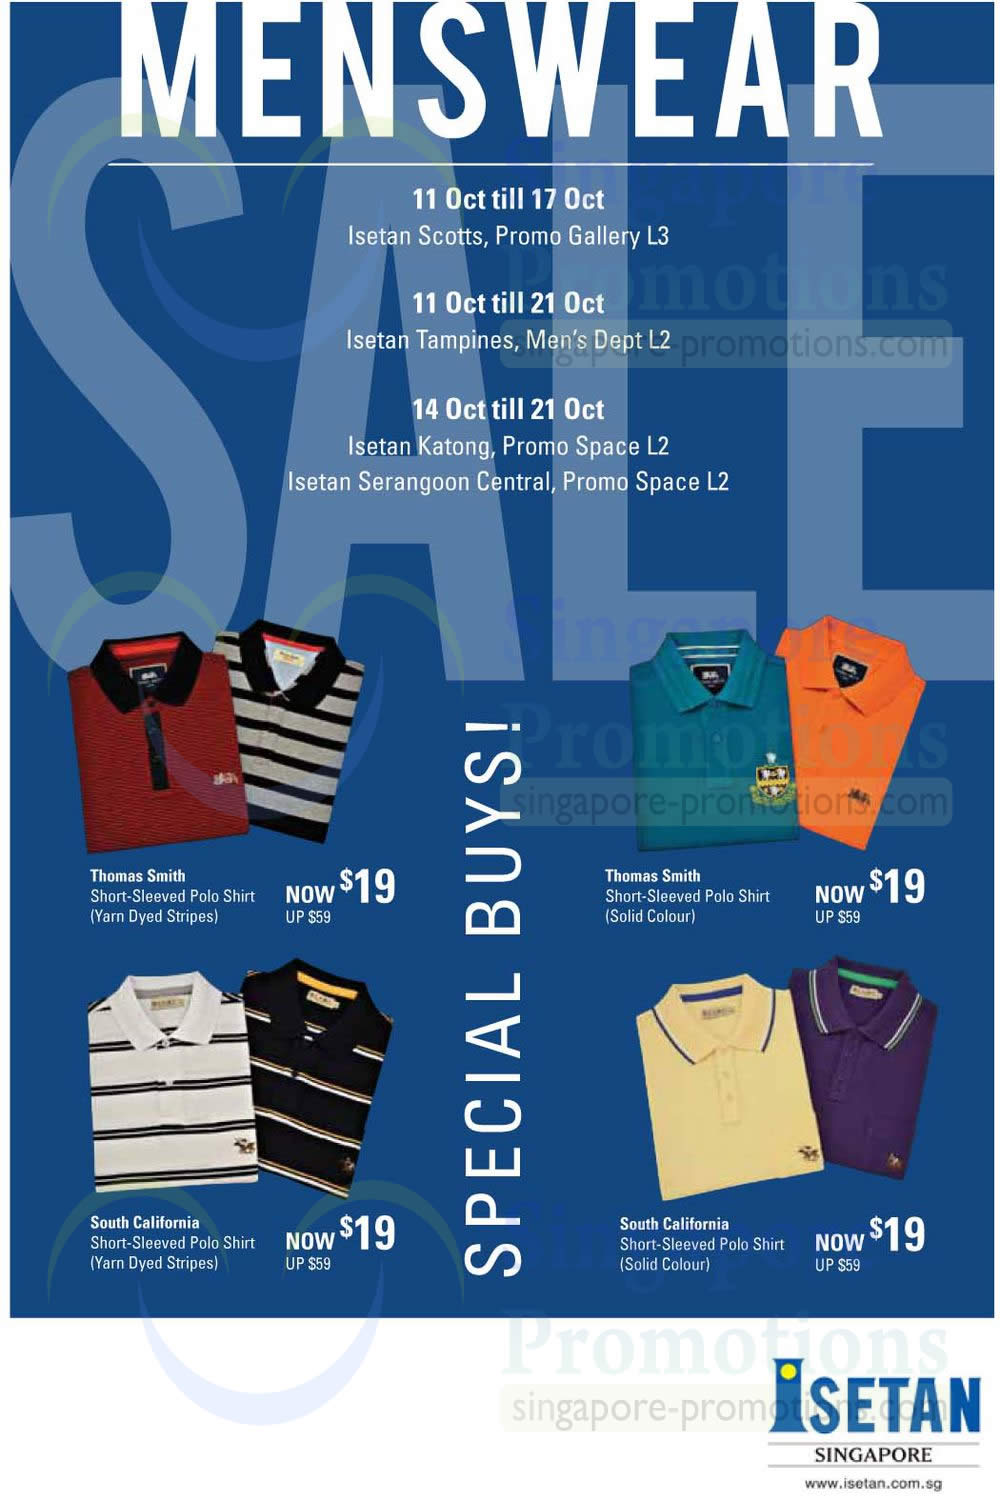 Featured image for Isetan Menswear Promo Offers @ Selected Outlets 11 - 21 Oct 2013